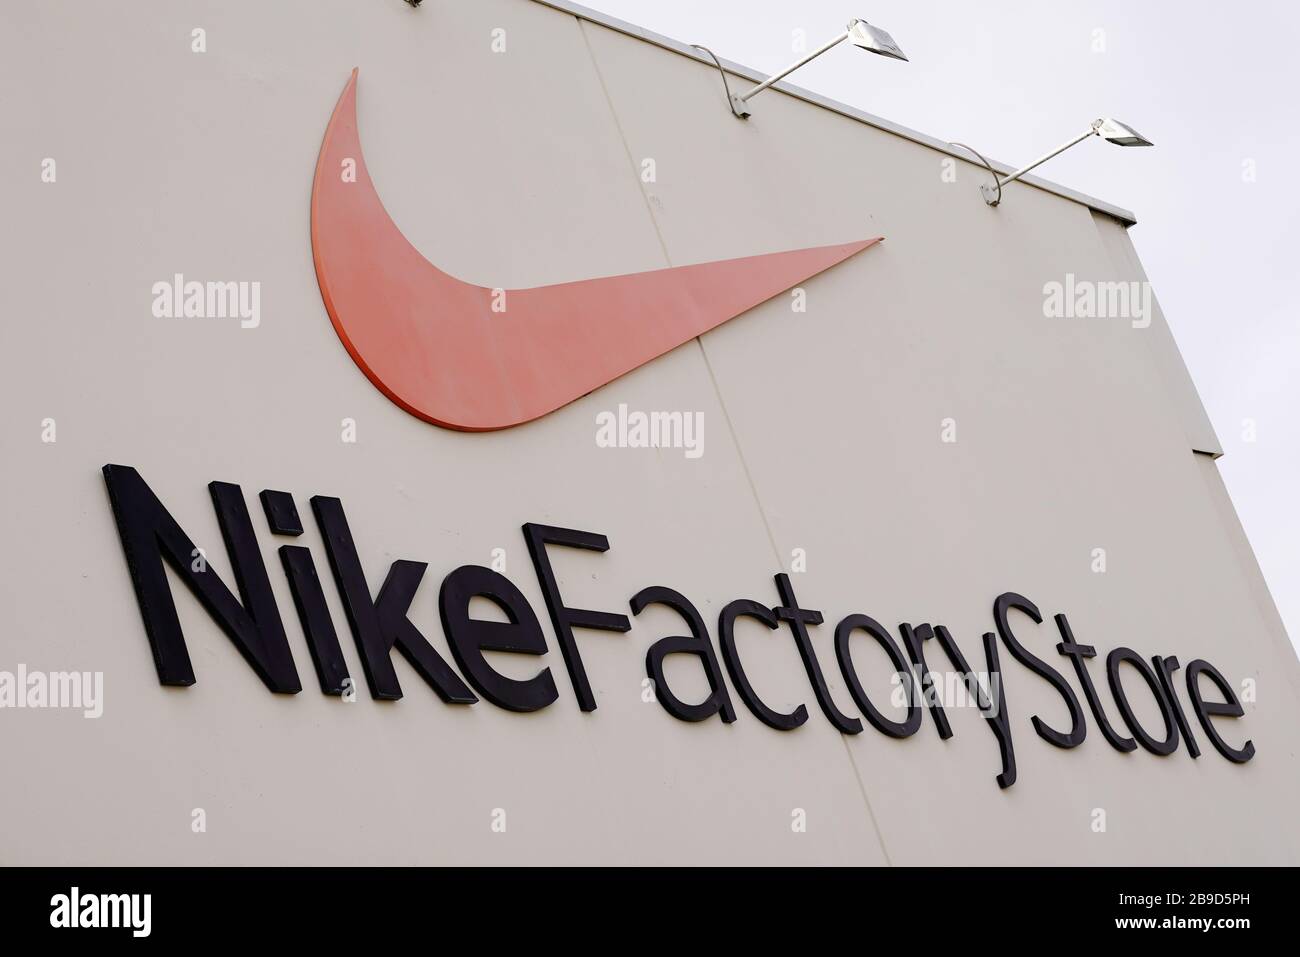 Bordeaux , Aquitaine / France - 09 24 2019 : Detail of the Nike factory store American shop multinational corporation manufactures sells footwear appa Stock Photo